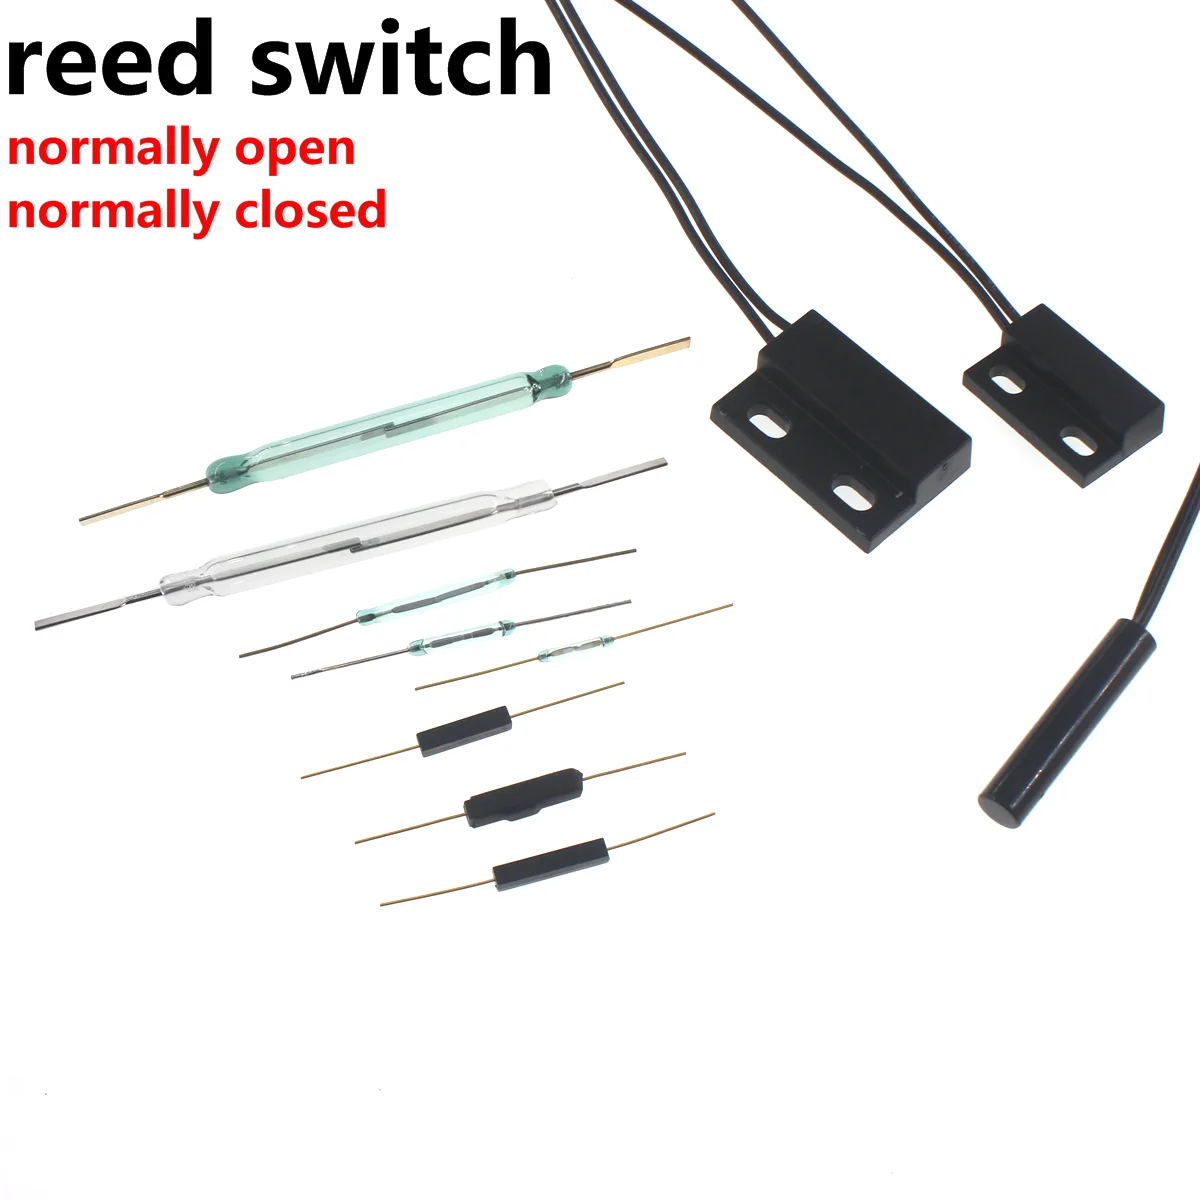 10/5PCS GPS-23  Normally Open Proximity Switch Magnetic Control Reed Switch Plastic GPS-11 2X14 5X50 GPS-01 GPS-30 GPS-14 yuanqi freight elevator autonics inductive proximity switch normally open sensor dw as 613 m30 002 plug type pnp